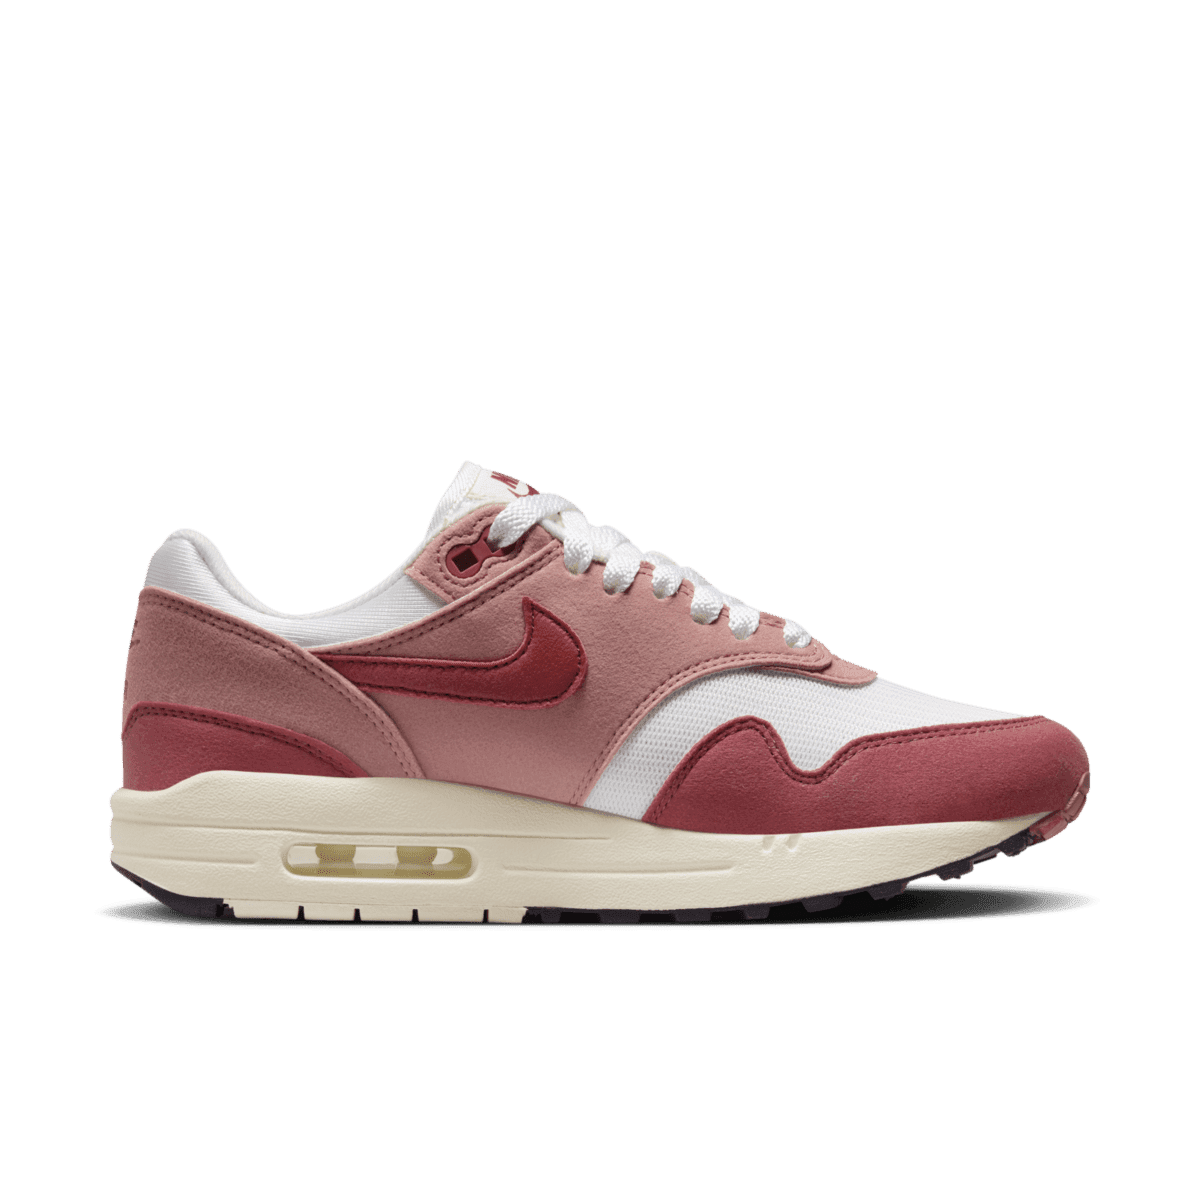 Nike Air Max 1 WMNS 'Red Stardust'